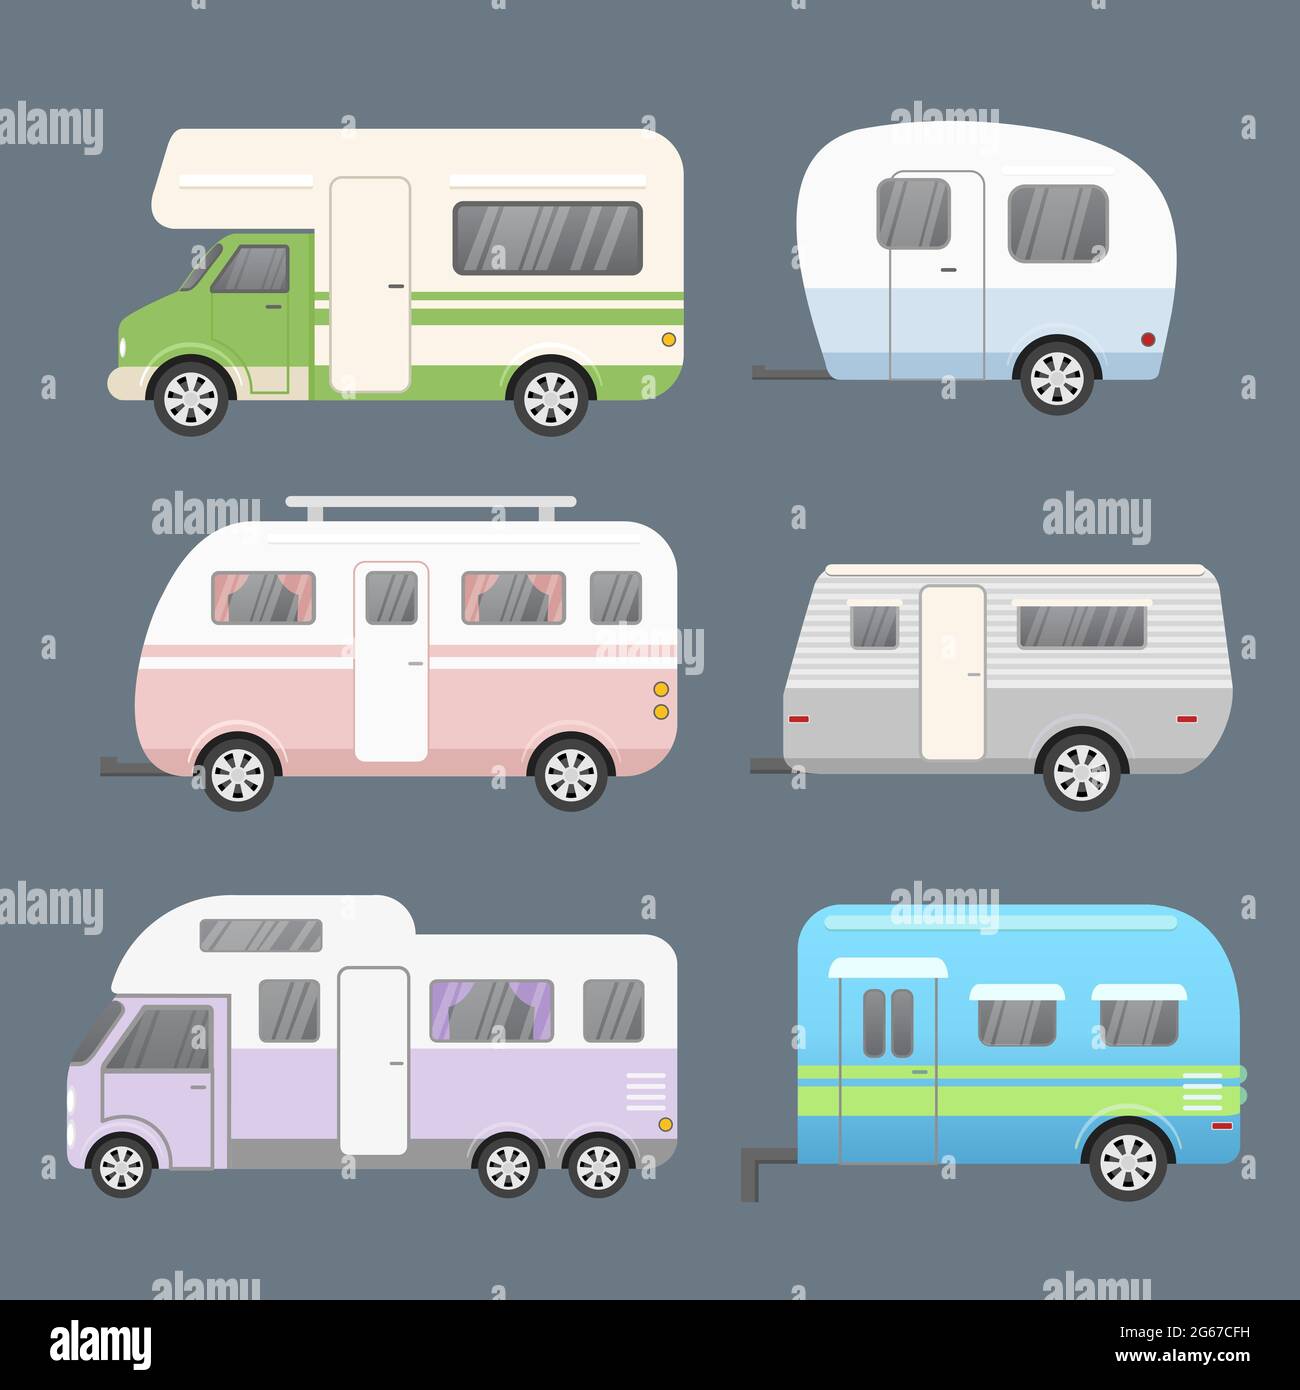 Vector illustration set of different types camping trailers, travel mobile home. Trailers for travel collection isolated on grey color background in Stock Vector